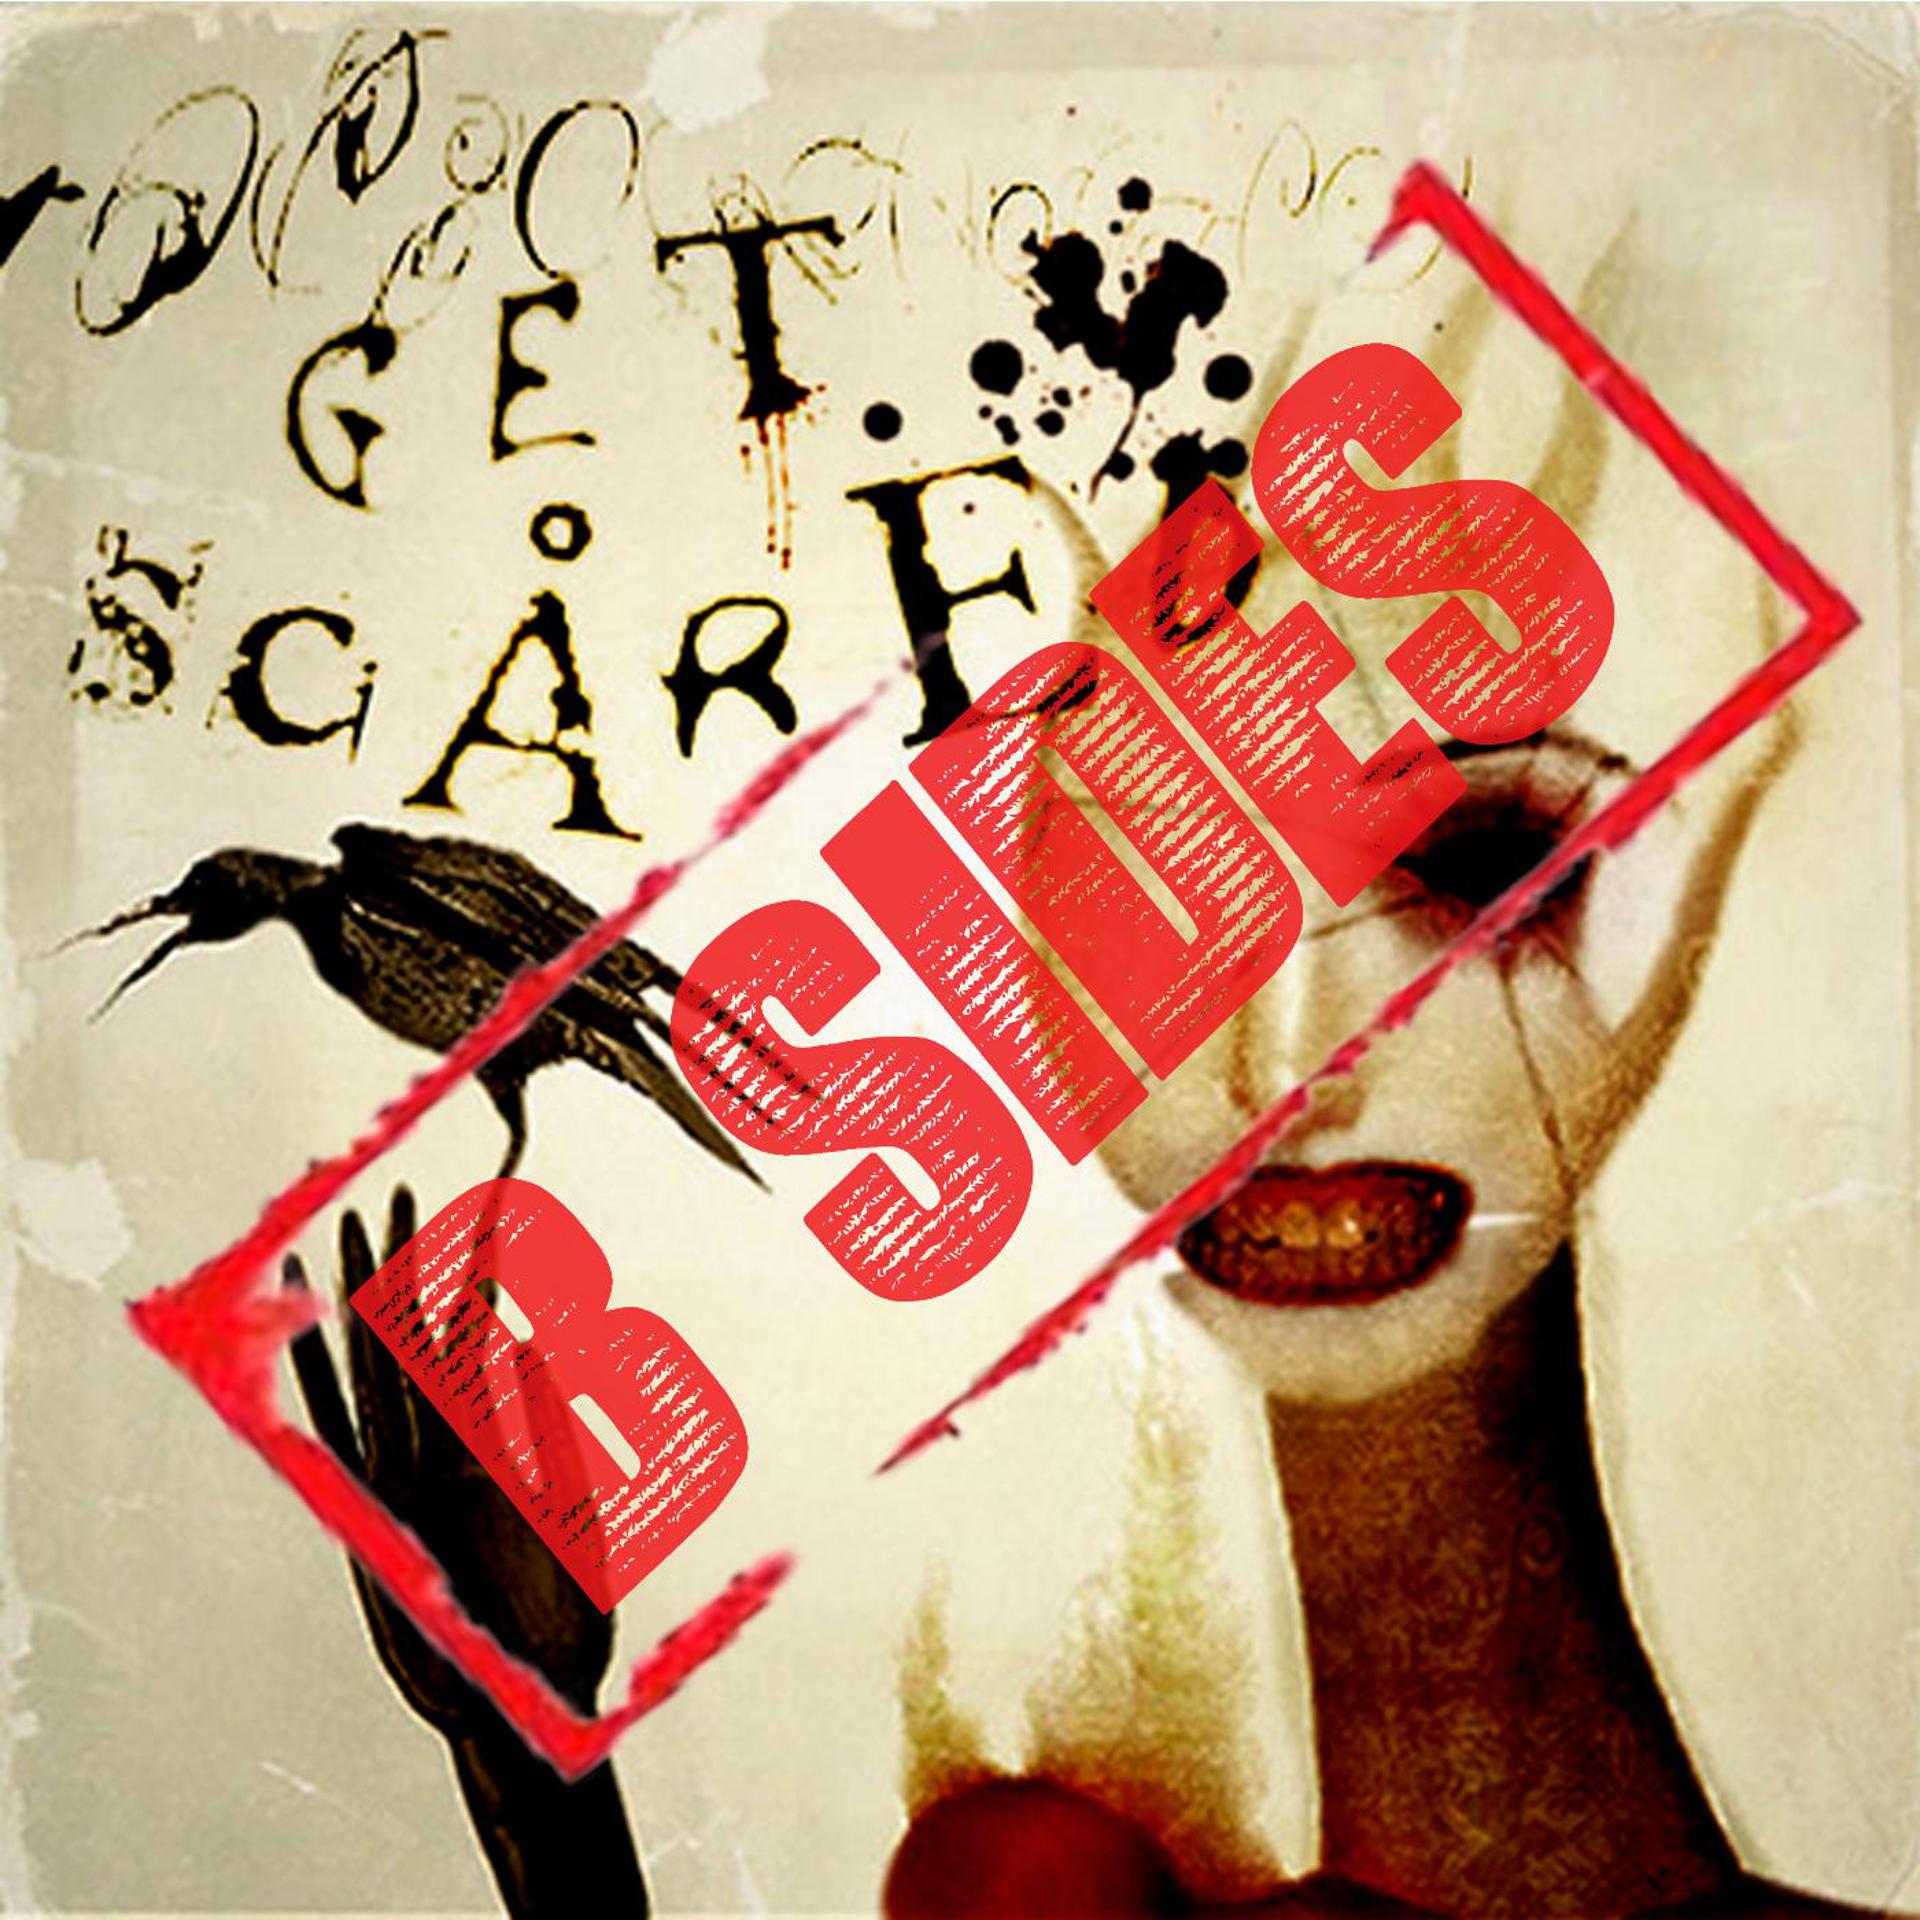 Get scared альбомы. Get scared обложки альбомов. Get scared cheap Tricks and theatrics. The Dead Days get scared. Scared to death long face bright red